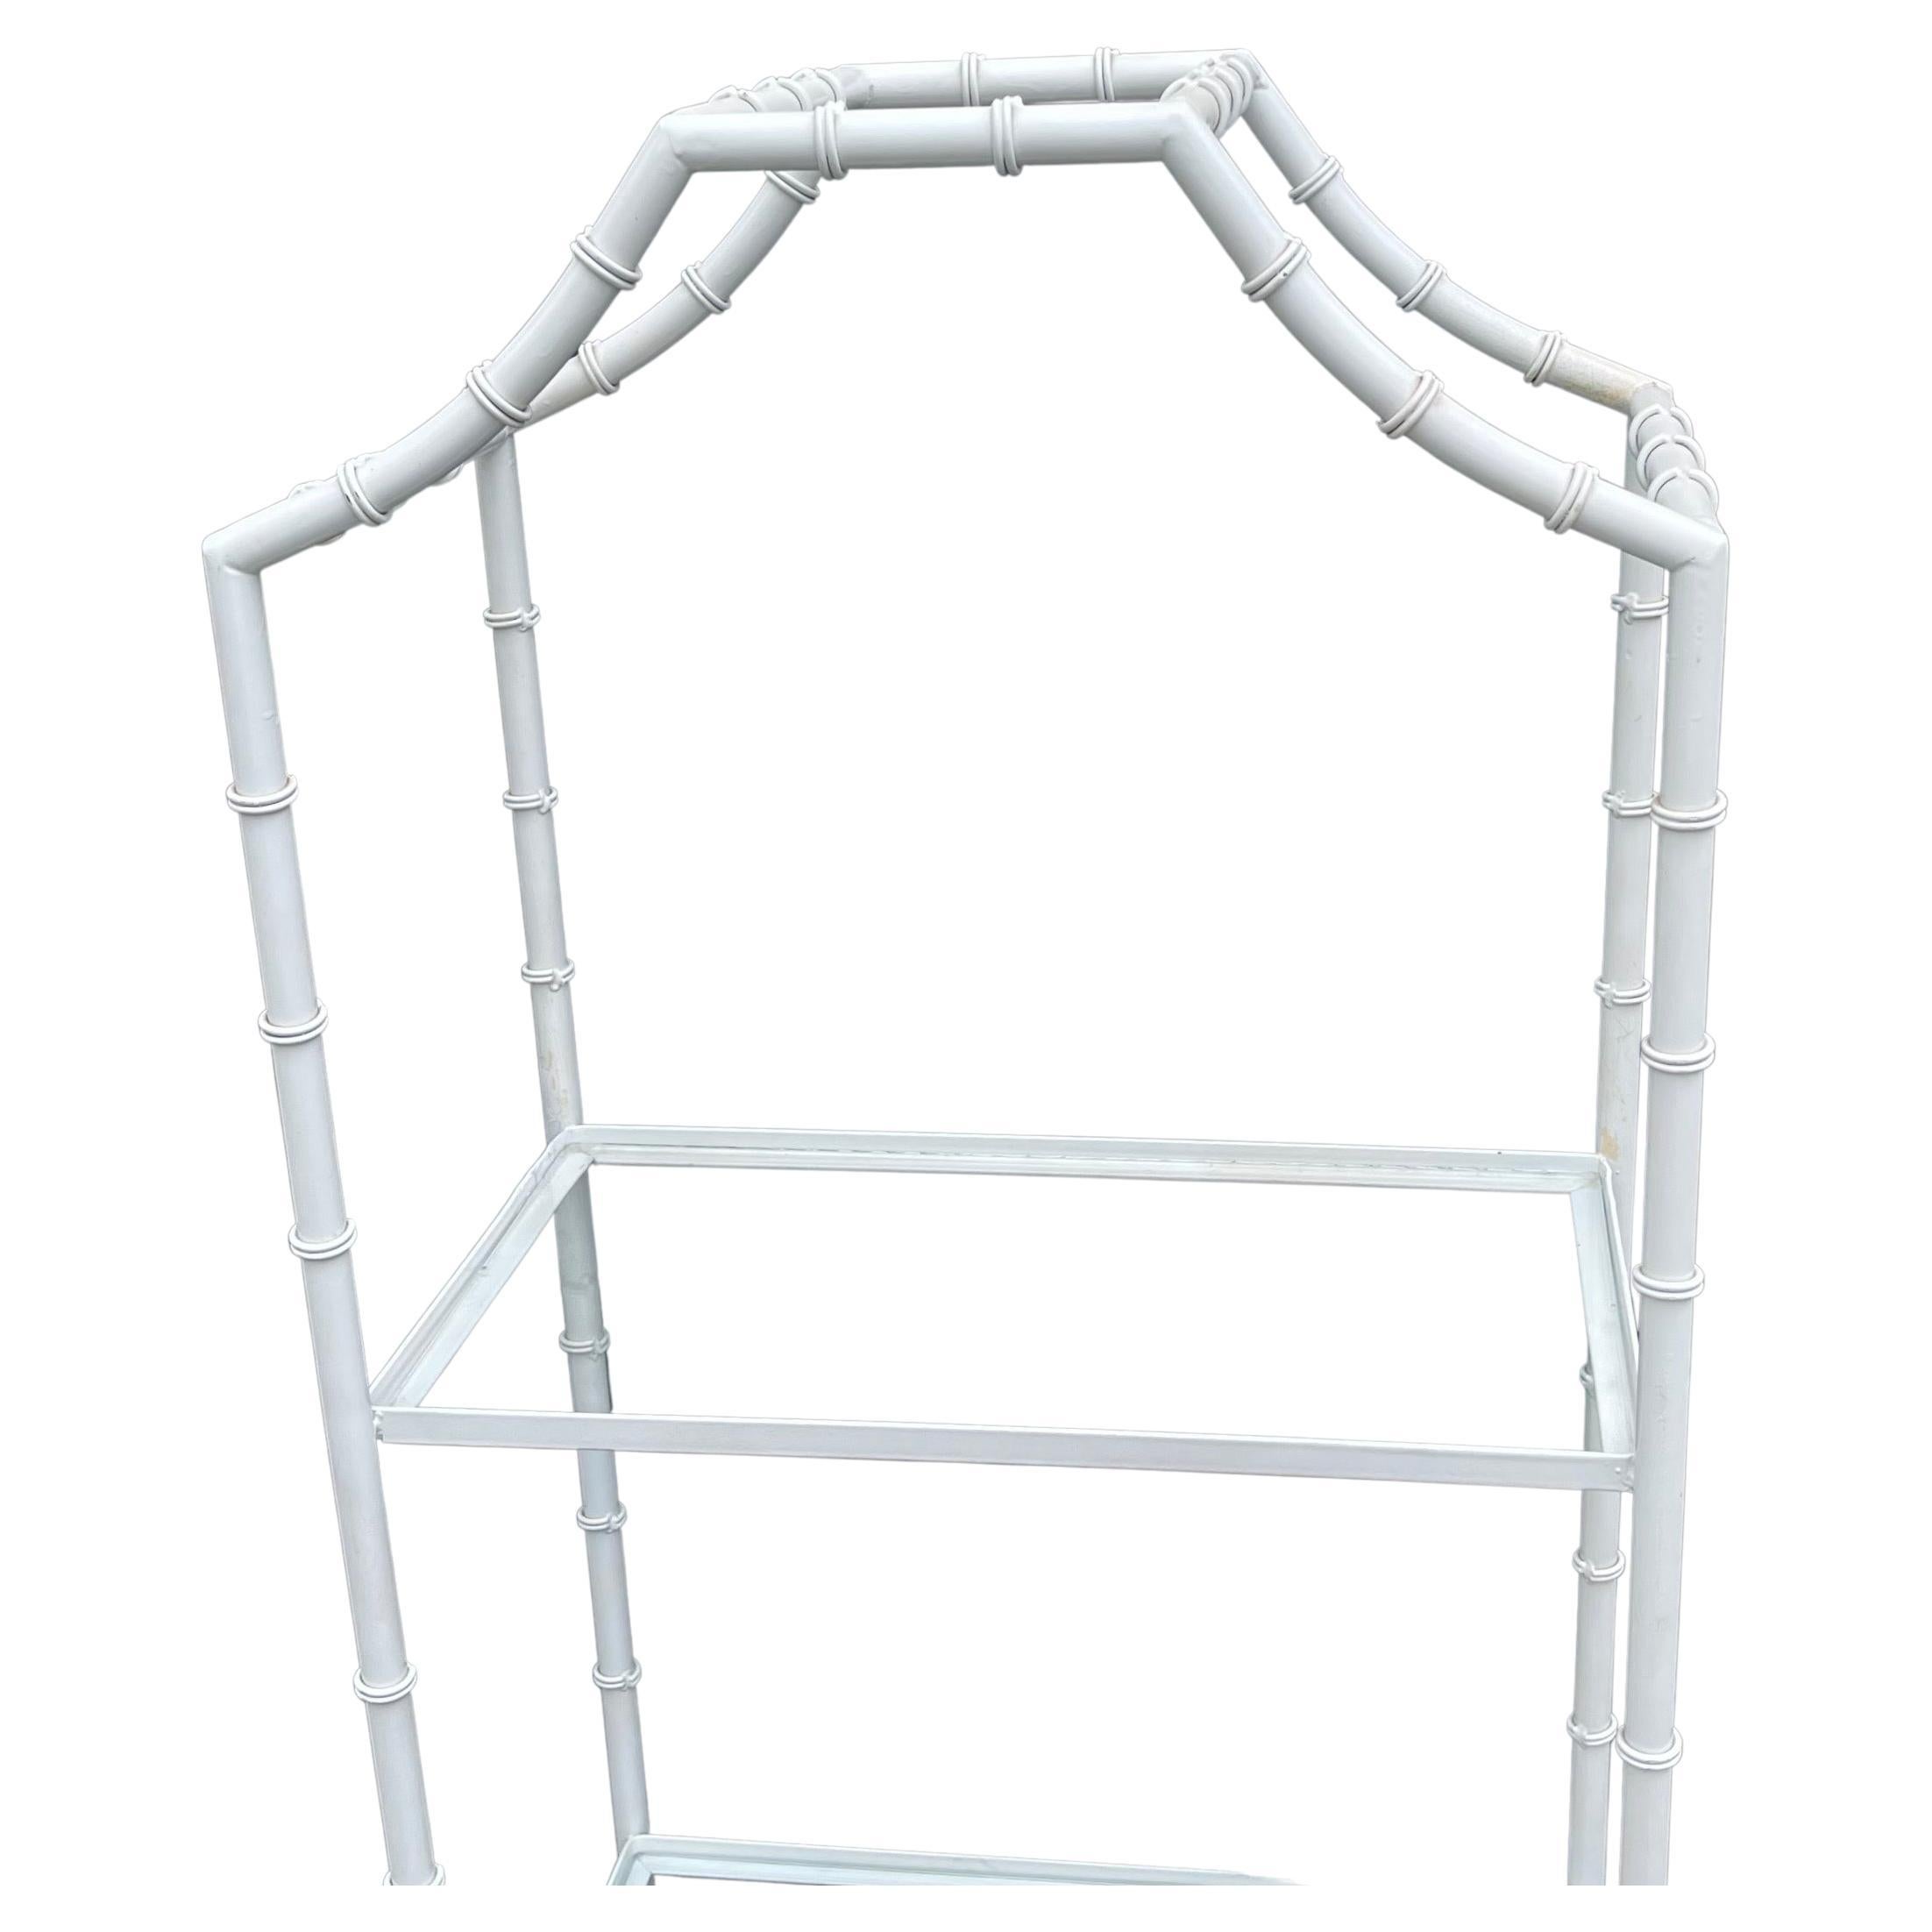 A Wonderful Pair Of Chinoiserie Faux Bamboo Arch Shape With Glass Insert Etagere / Bookshelf's Painted White